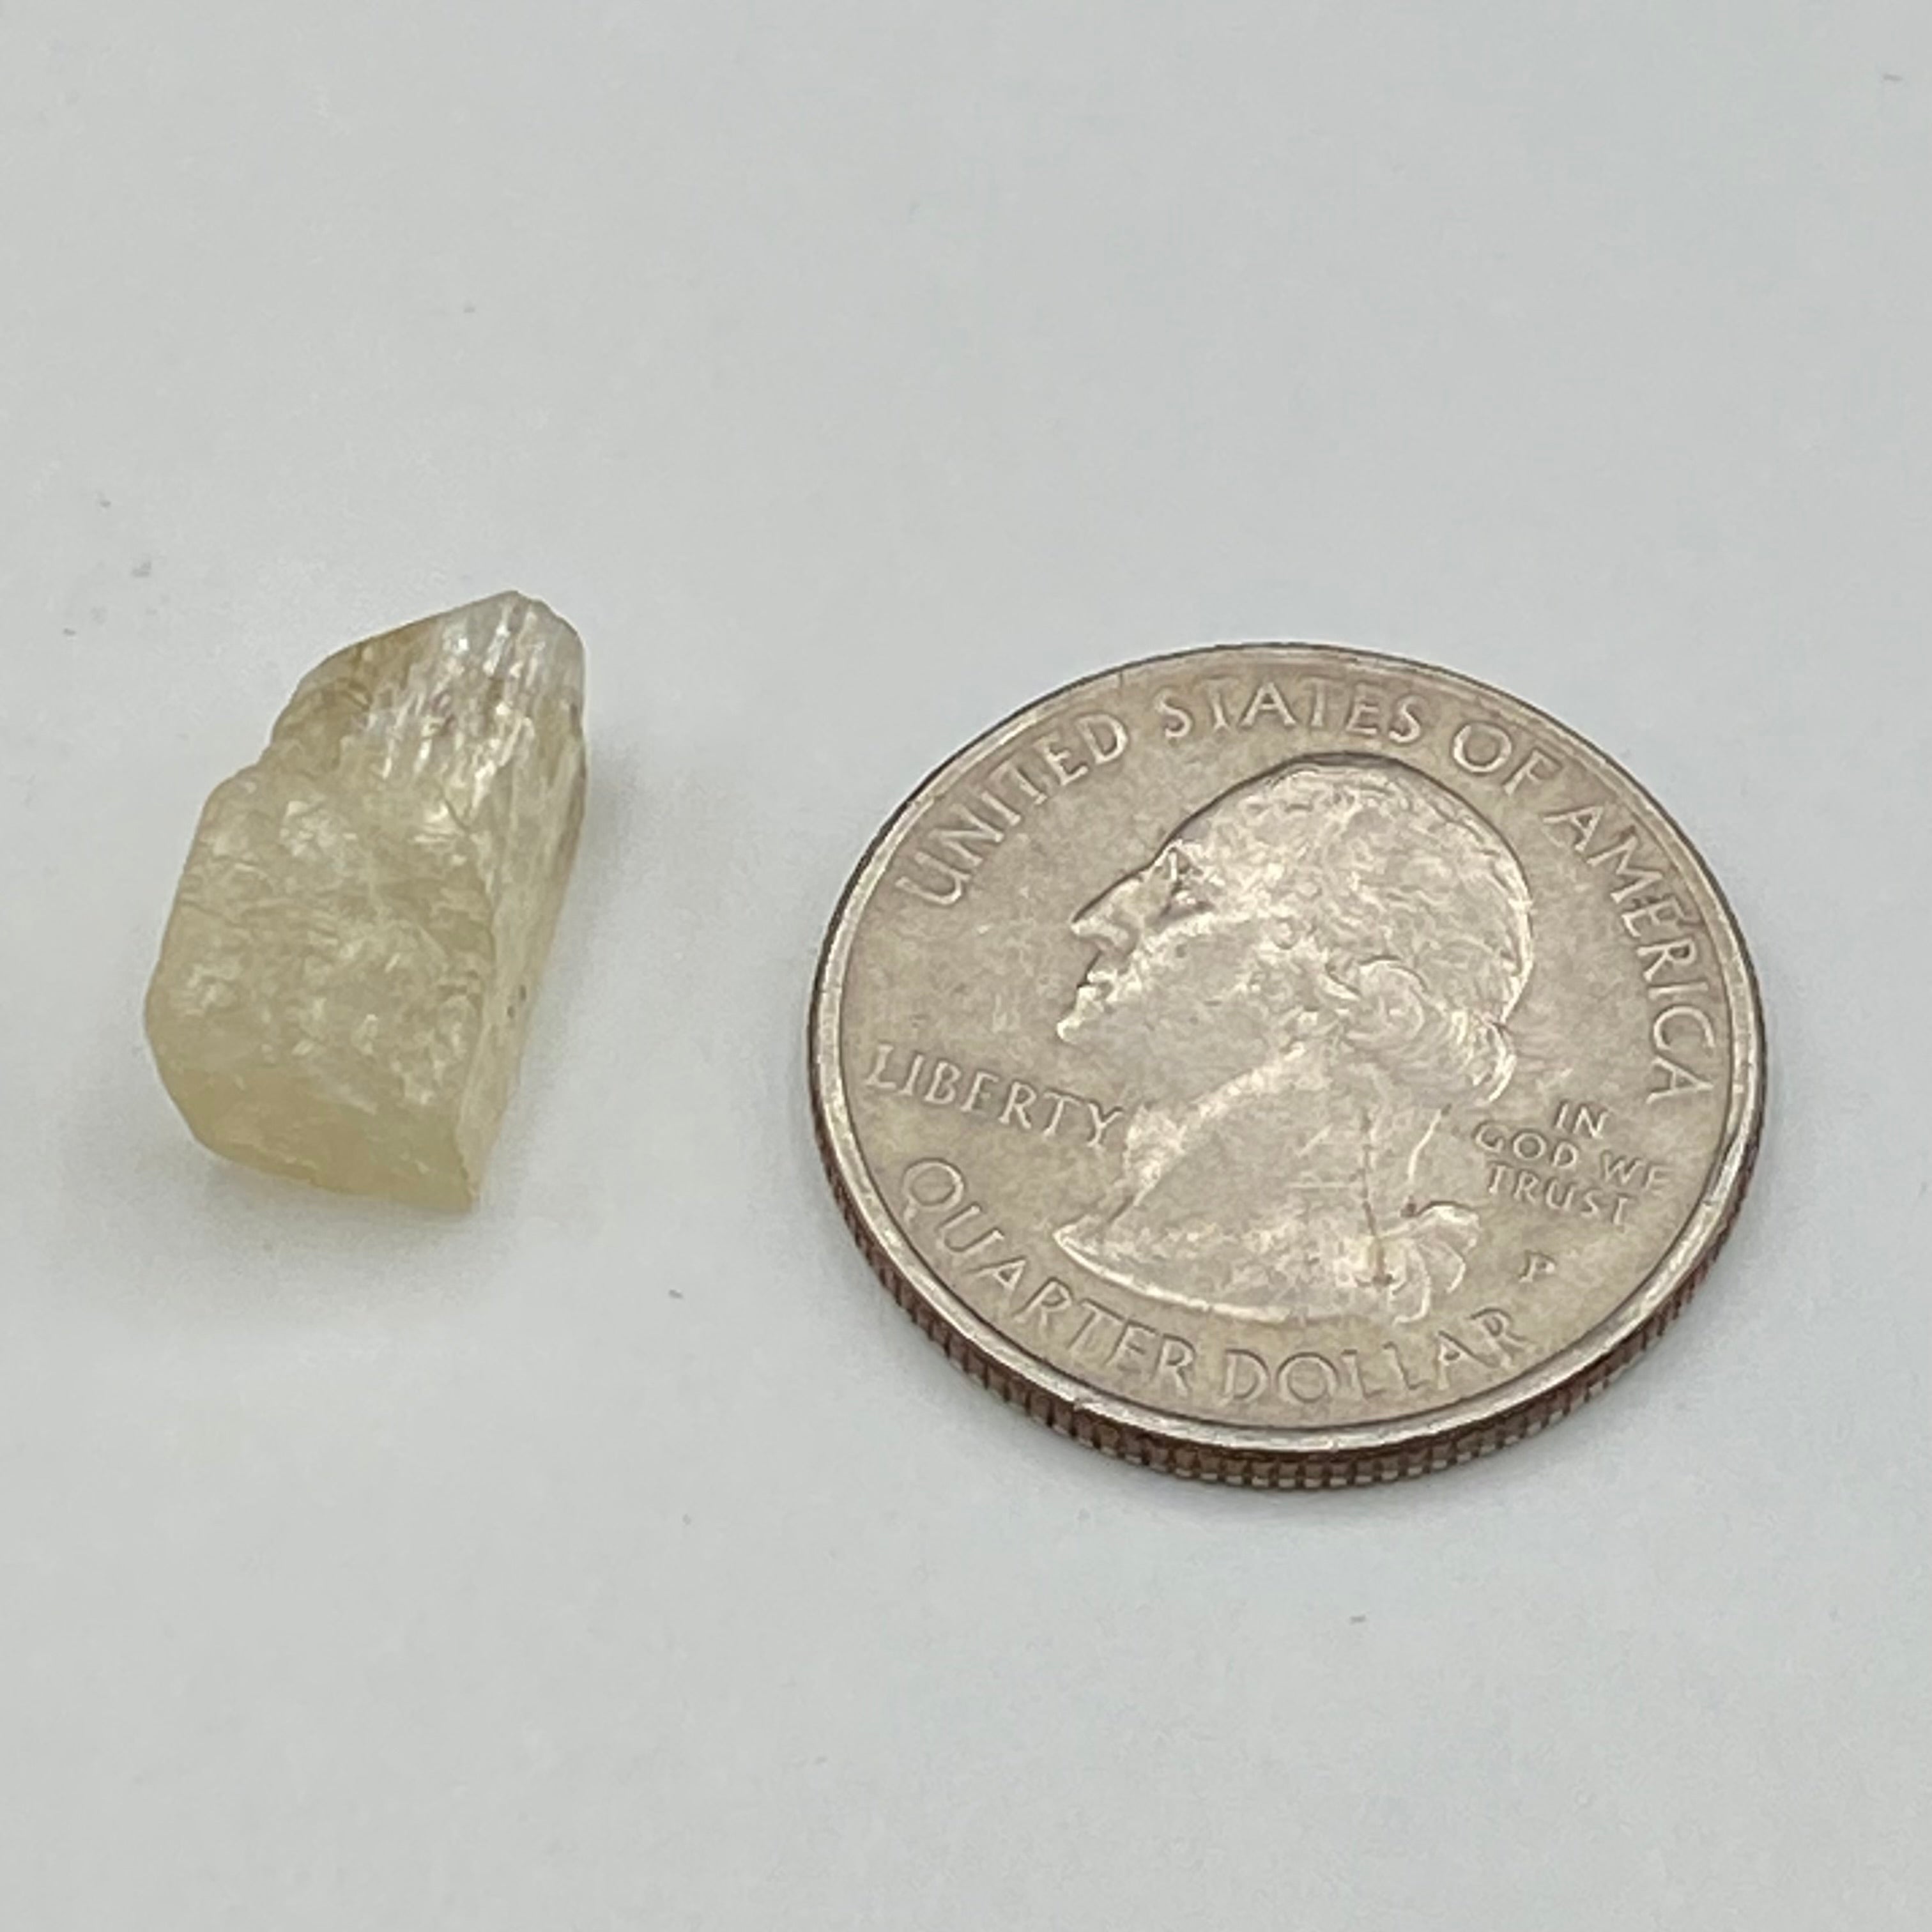 Imperial Topaz Natural Full Terminated Crystal - 191